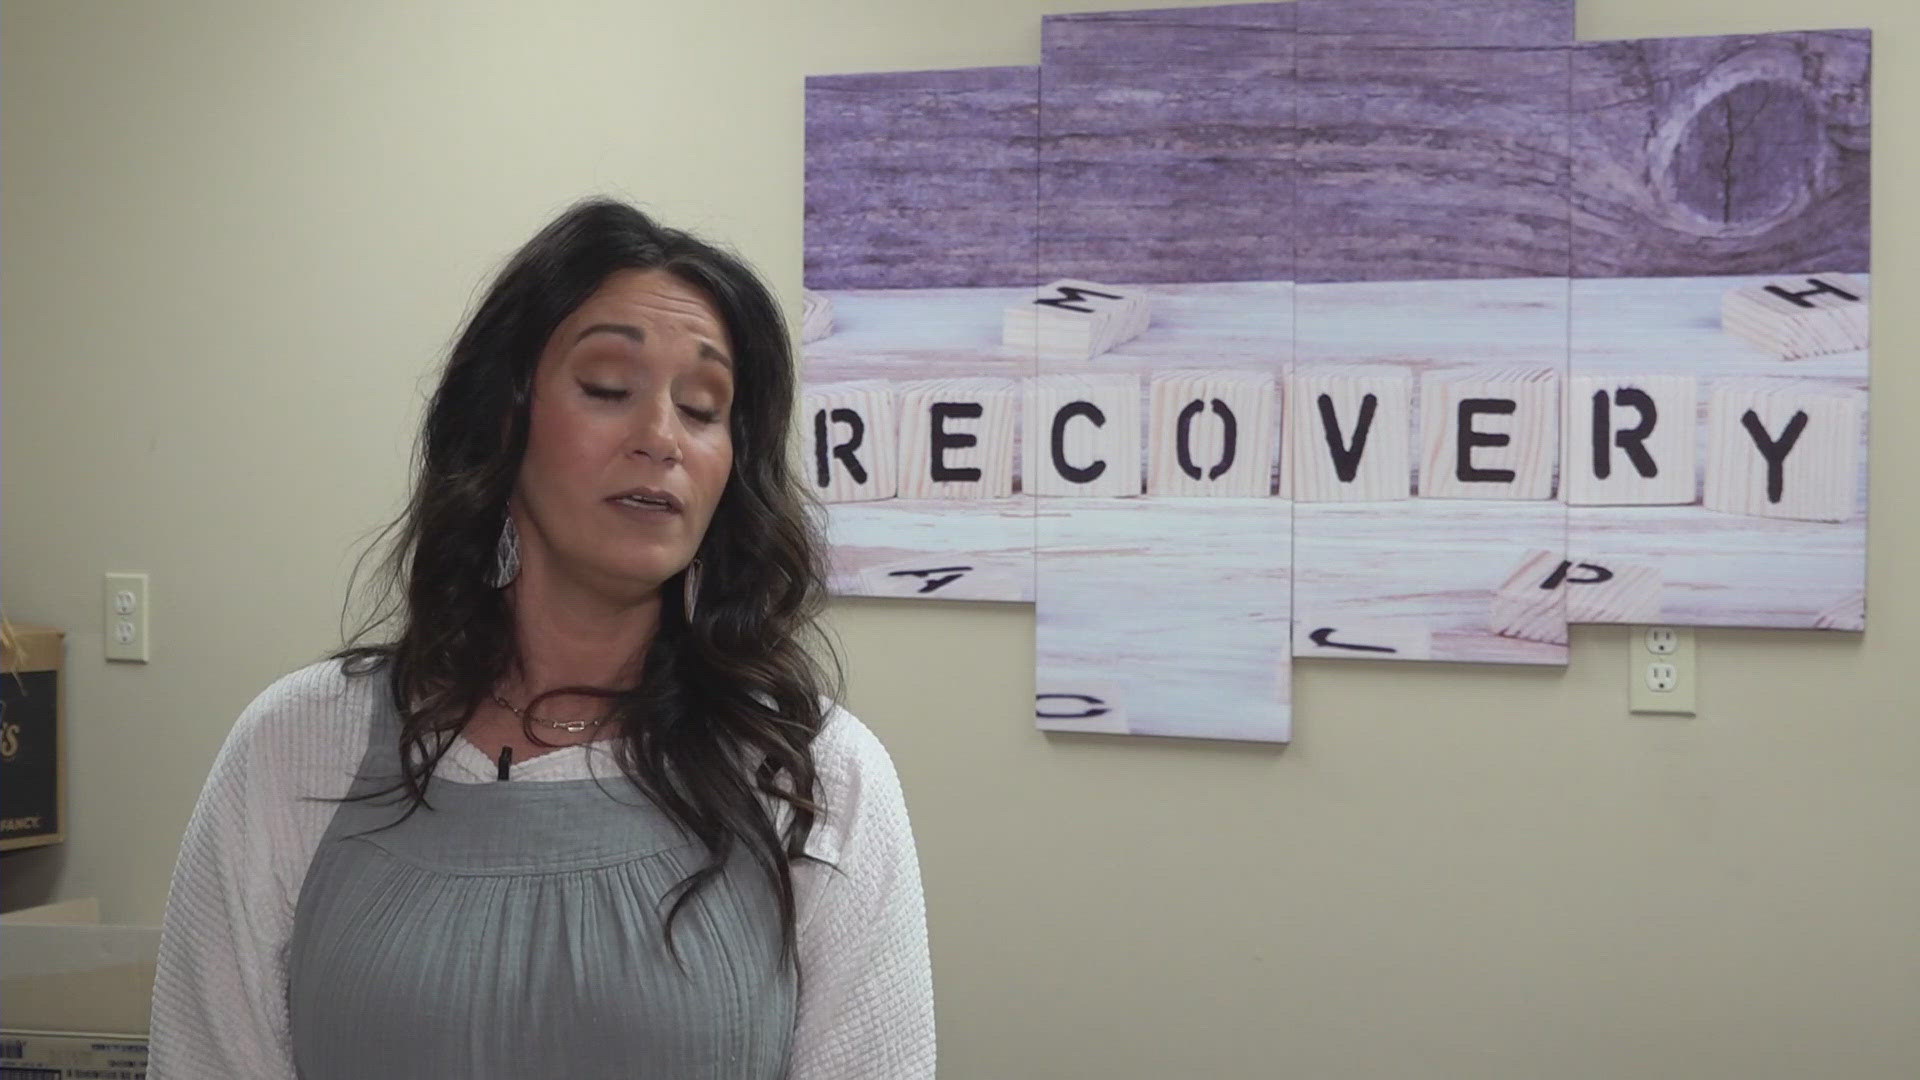 Keisha Thrower said growing up in Scott County, her life was riddled with trauma that led to addiction. Now, she's using her experiences to help young people.